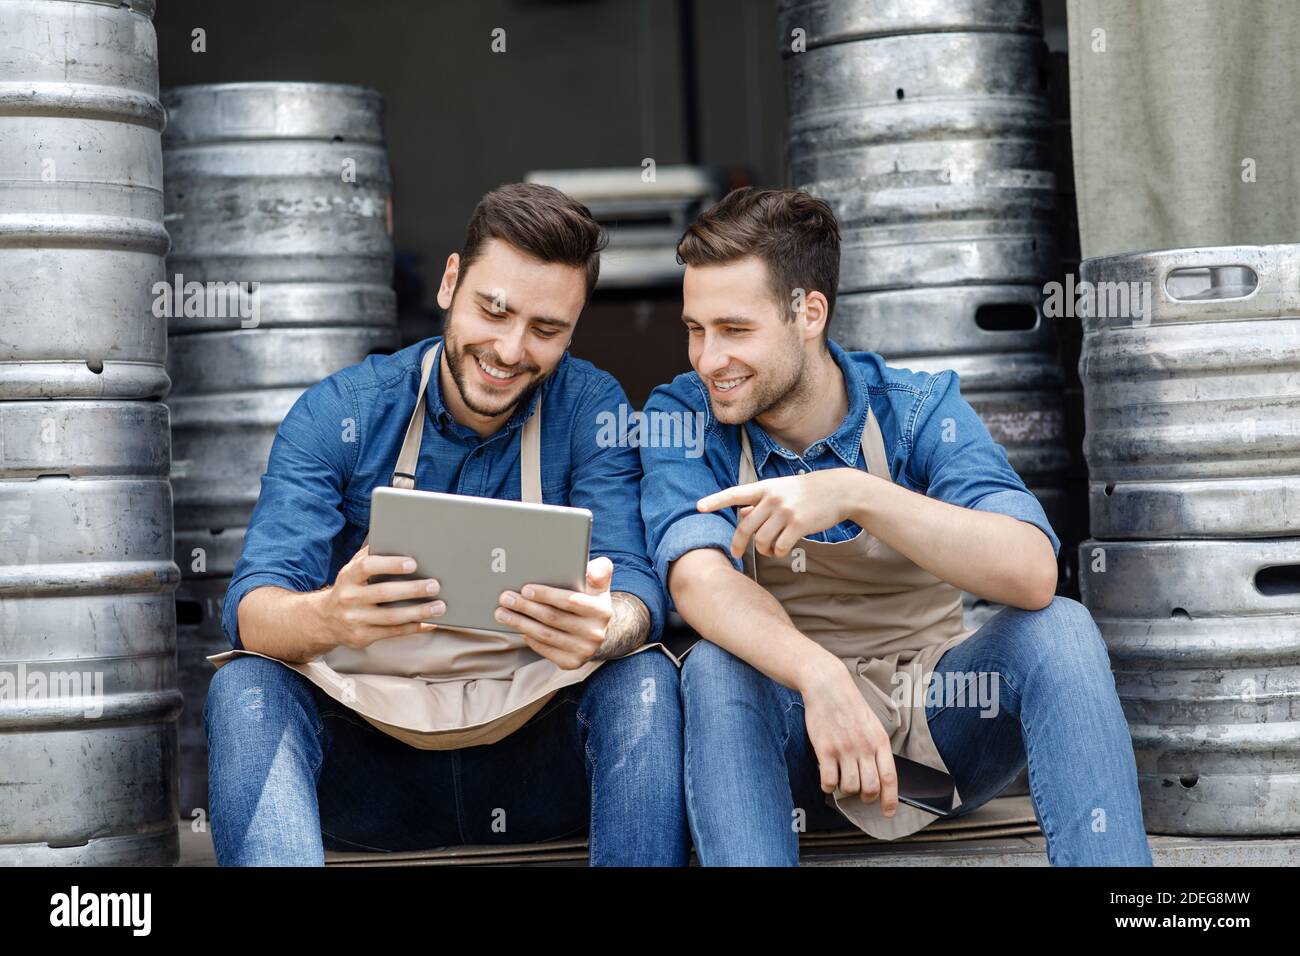 Workers brewers managers and modern technology for business management Stock Photo